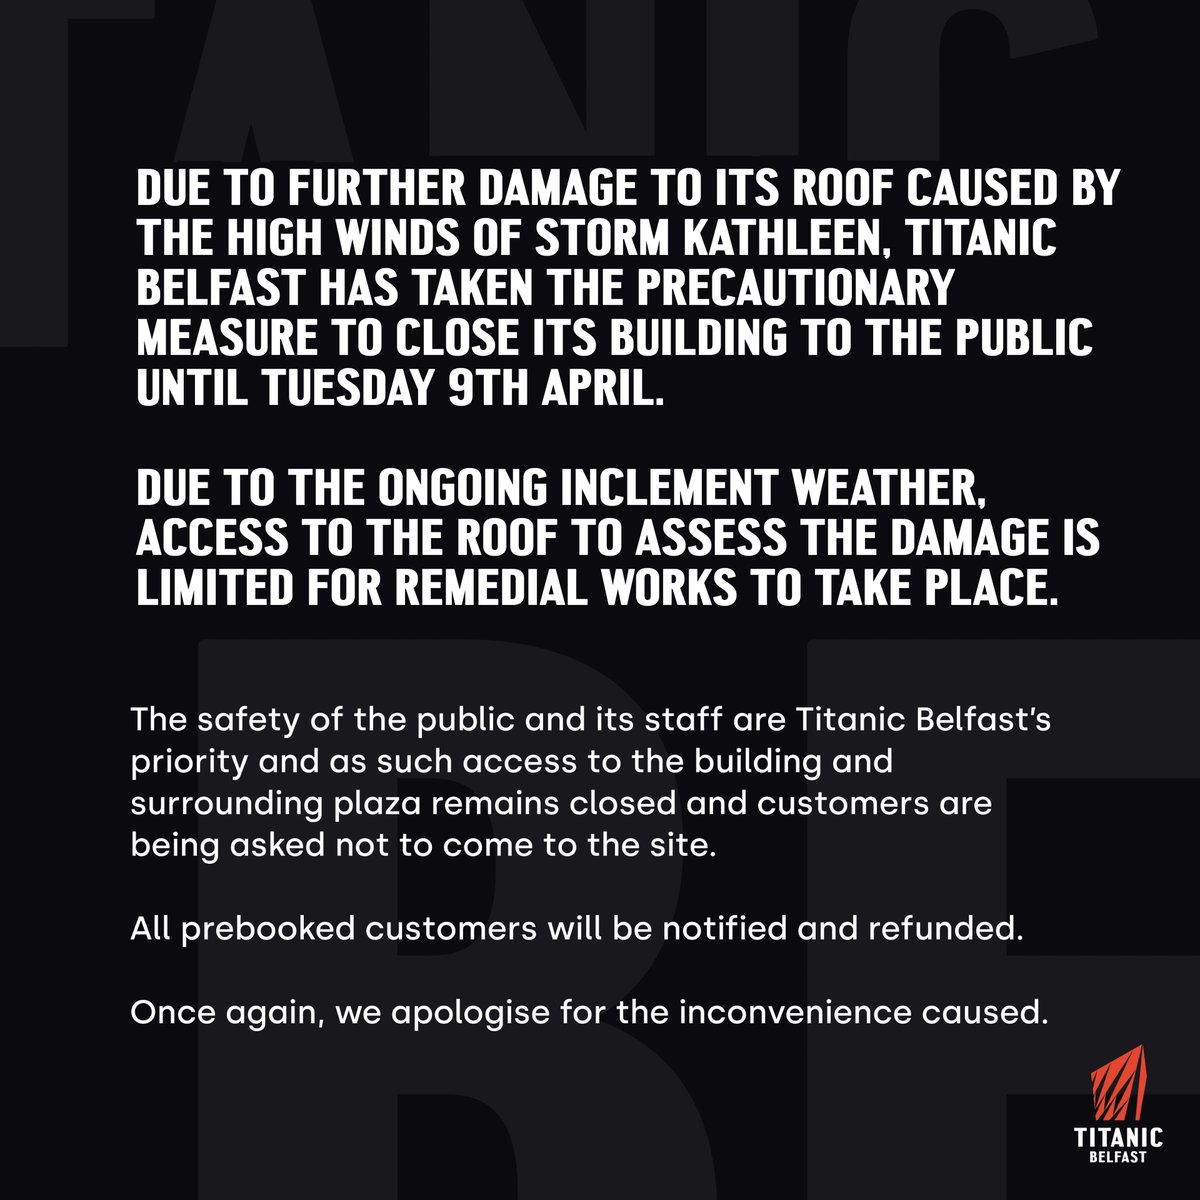 Due to further damage to the roof caused yesterday by Storm Kathleen, @TitanicBelfast has taken the precautionary measure to close its building to the public until Tuesday 9th April. Please see titanicbelfast.com/closure for further information.